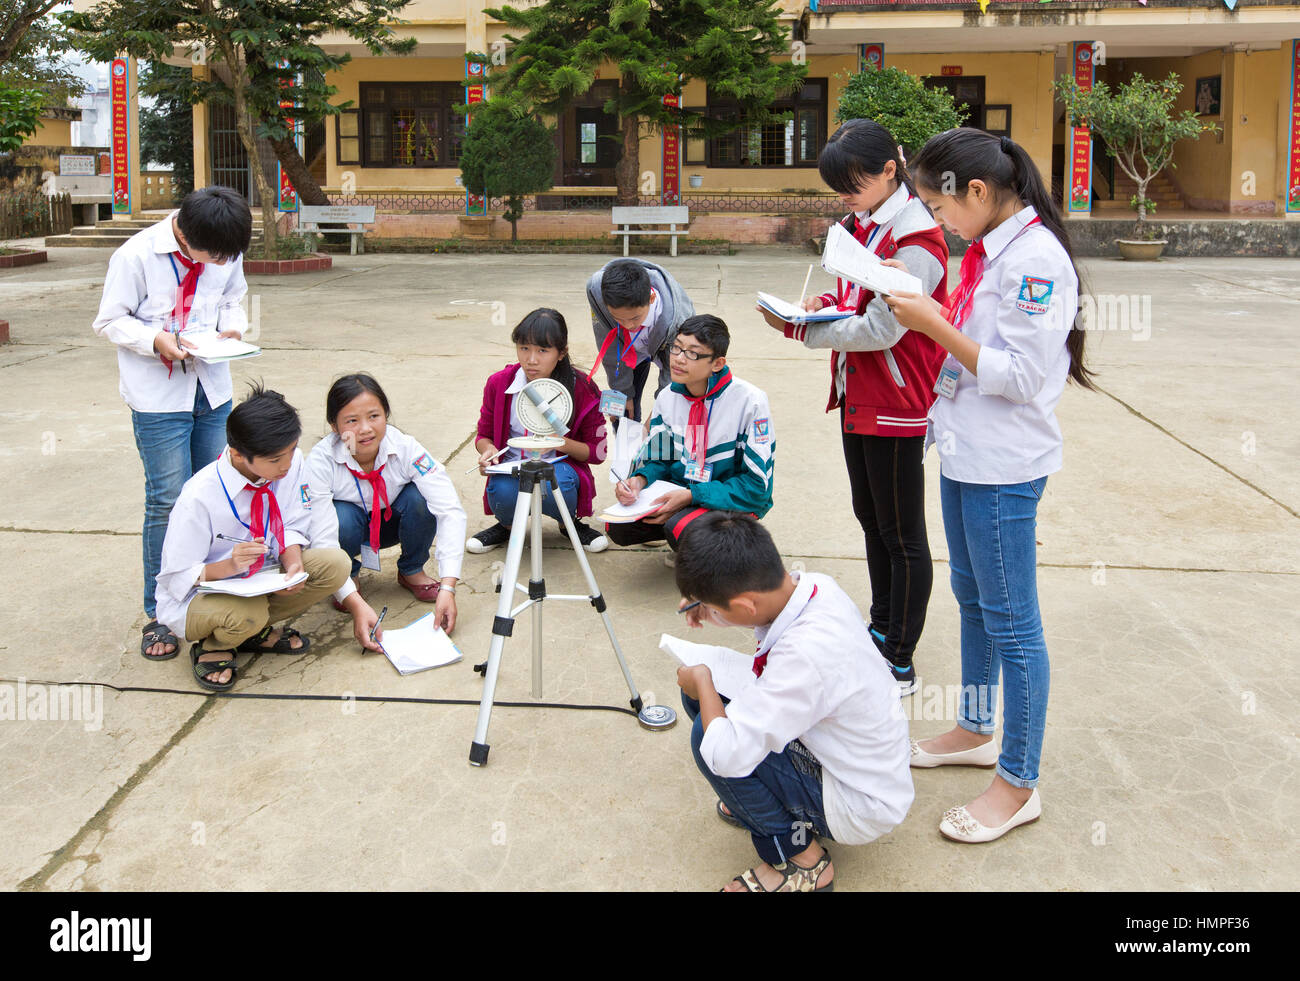 School children attending outdoor classroom, learning how to operate a sextant, Thai Giang Boarding School. Stock Photo